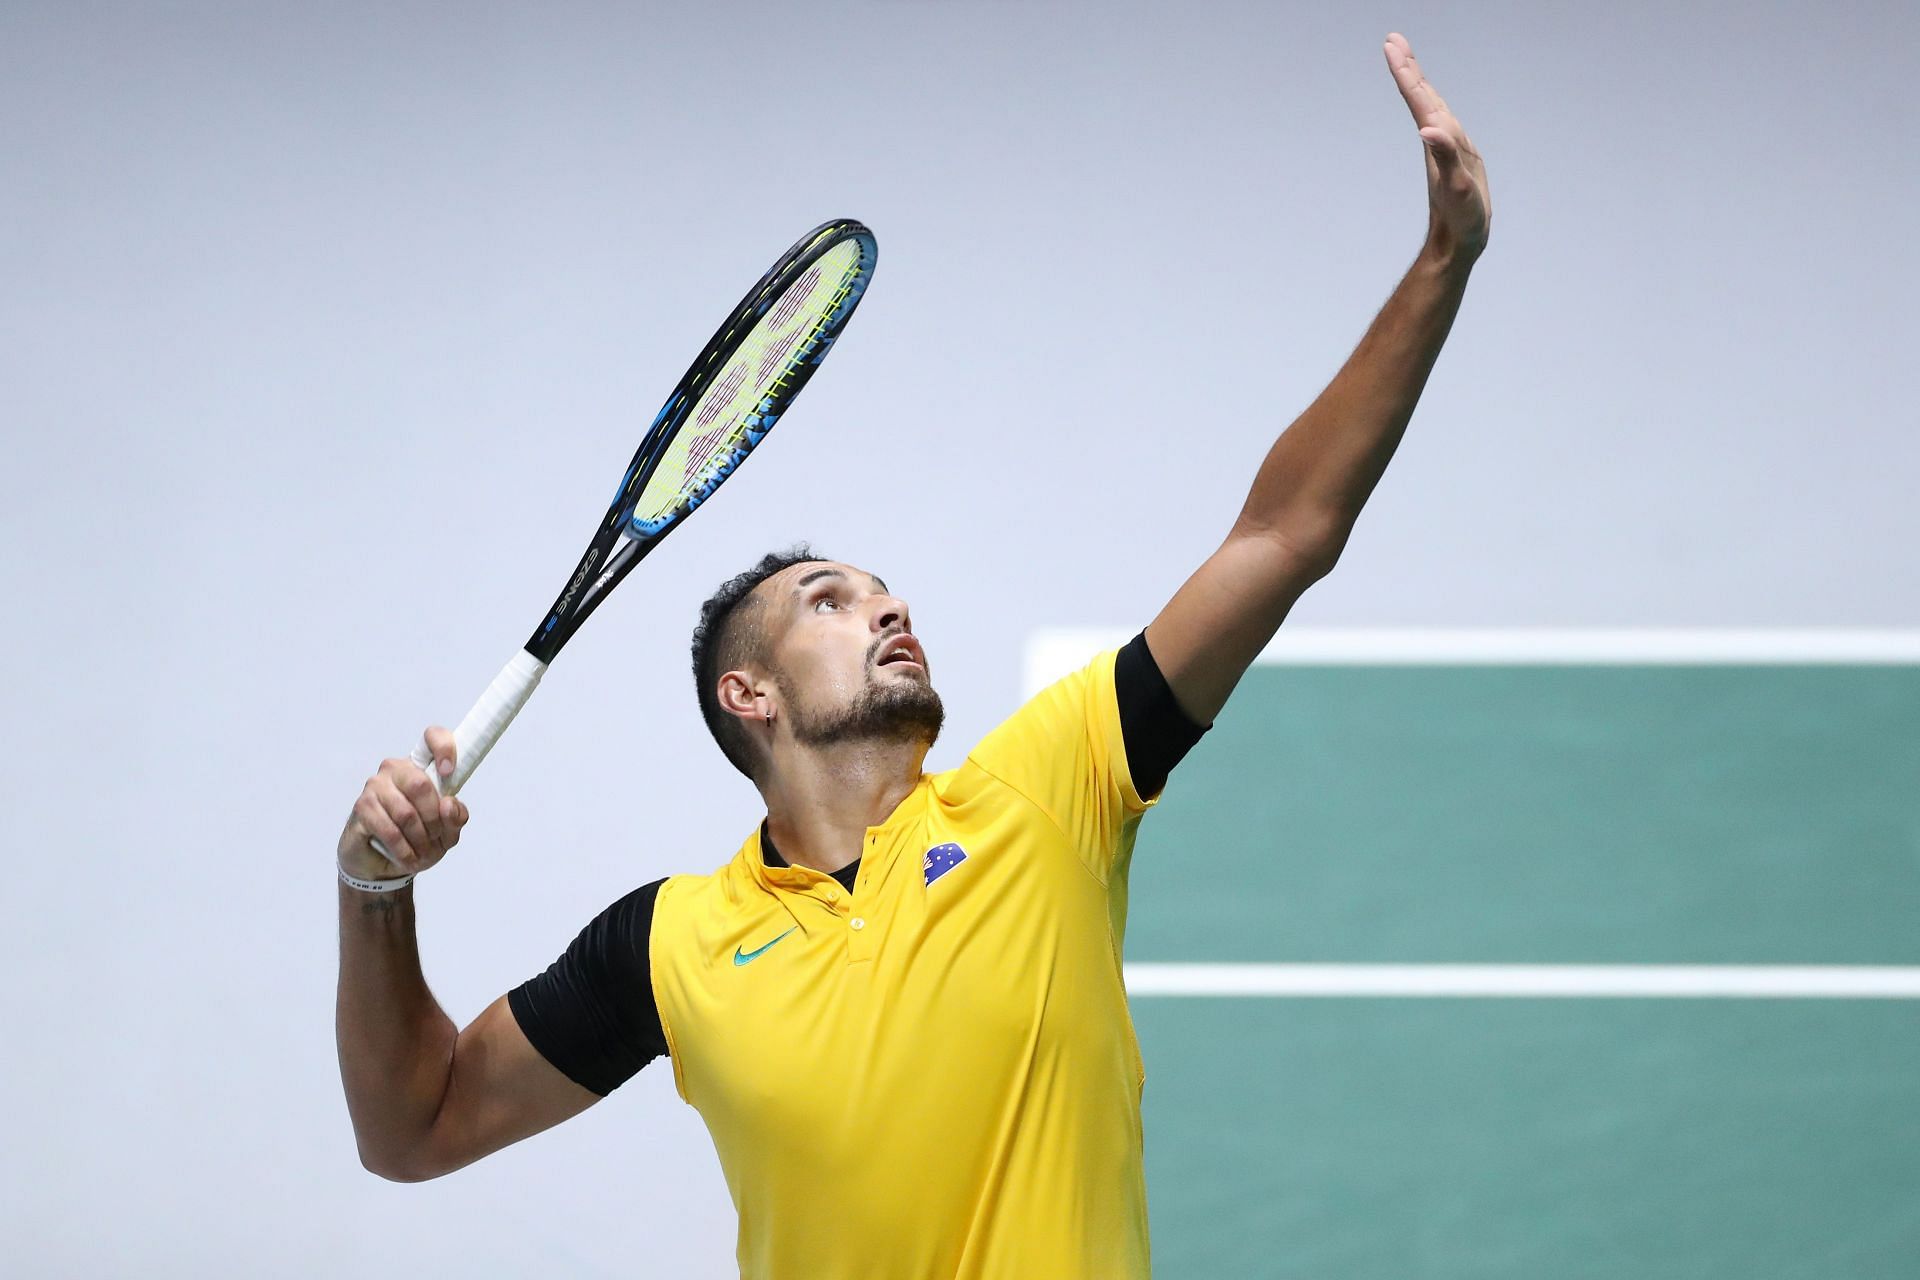 Nick Kyrgios last played the Davis Cup in 2019.